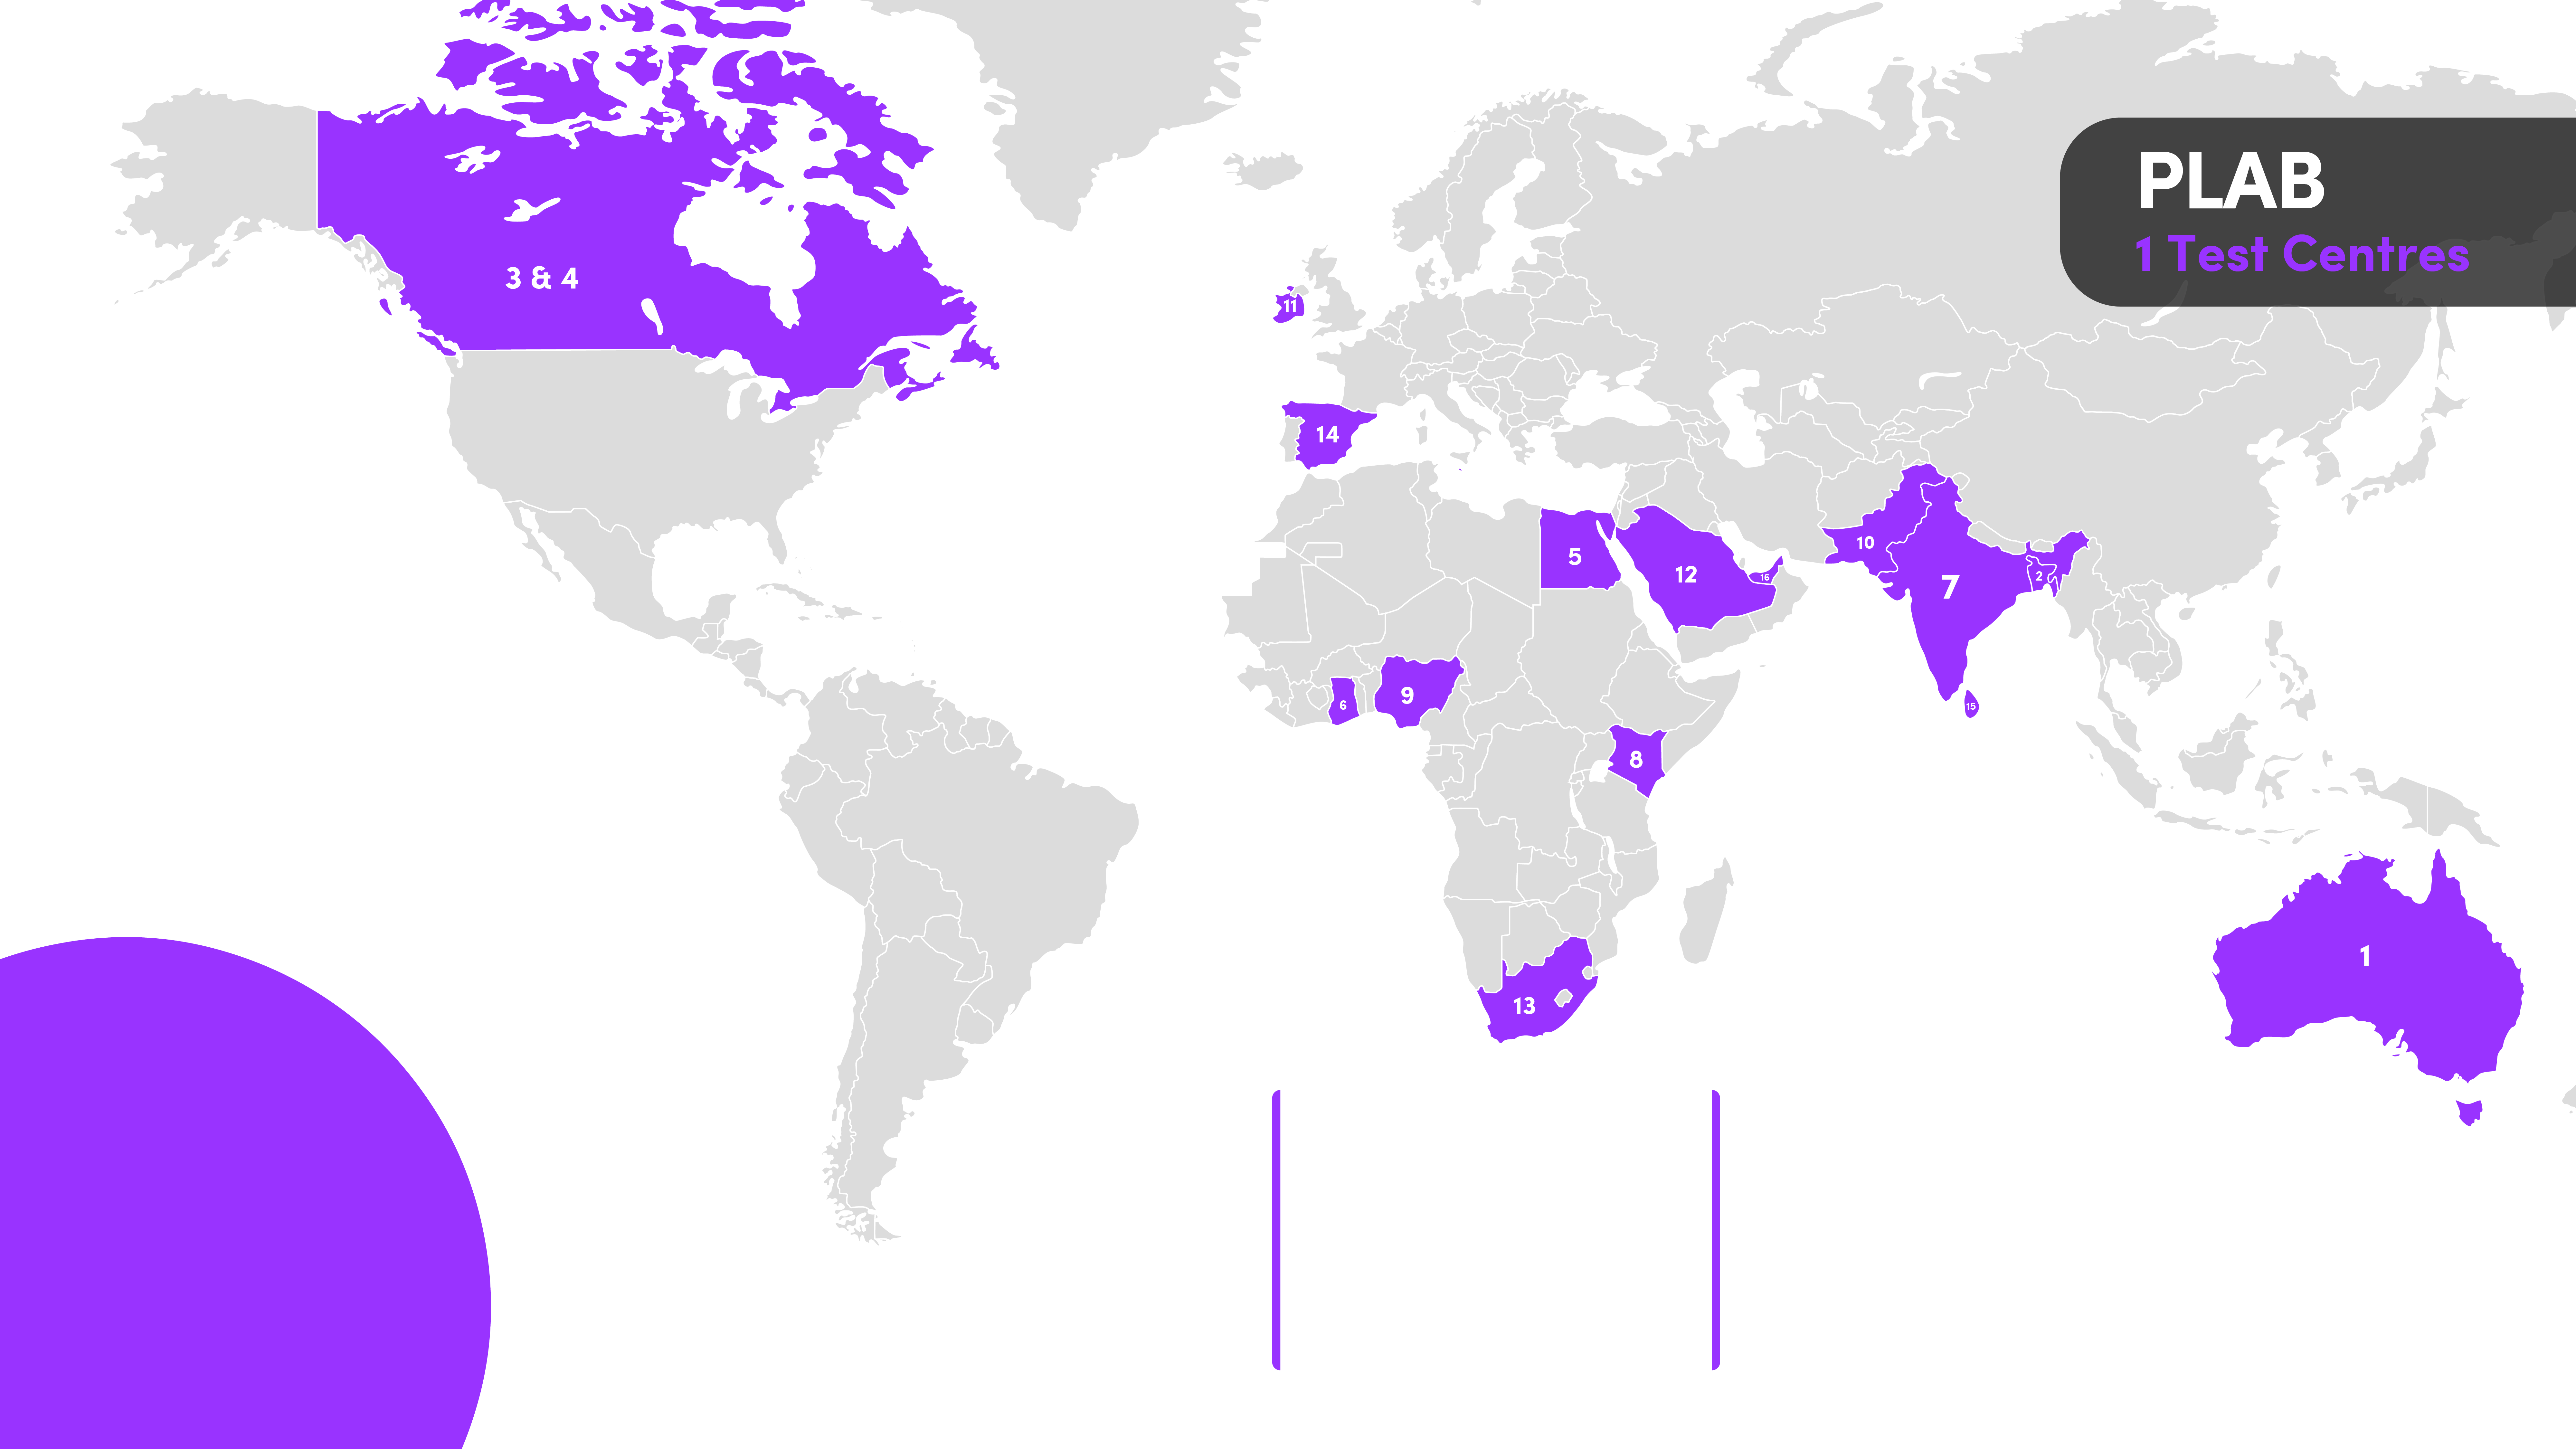 World Map of PLAB 1 Test Centre Locations